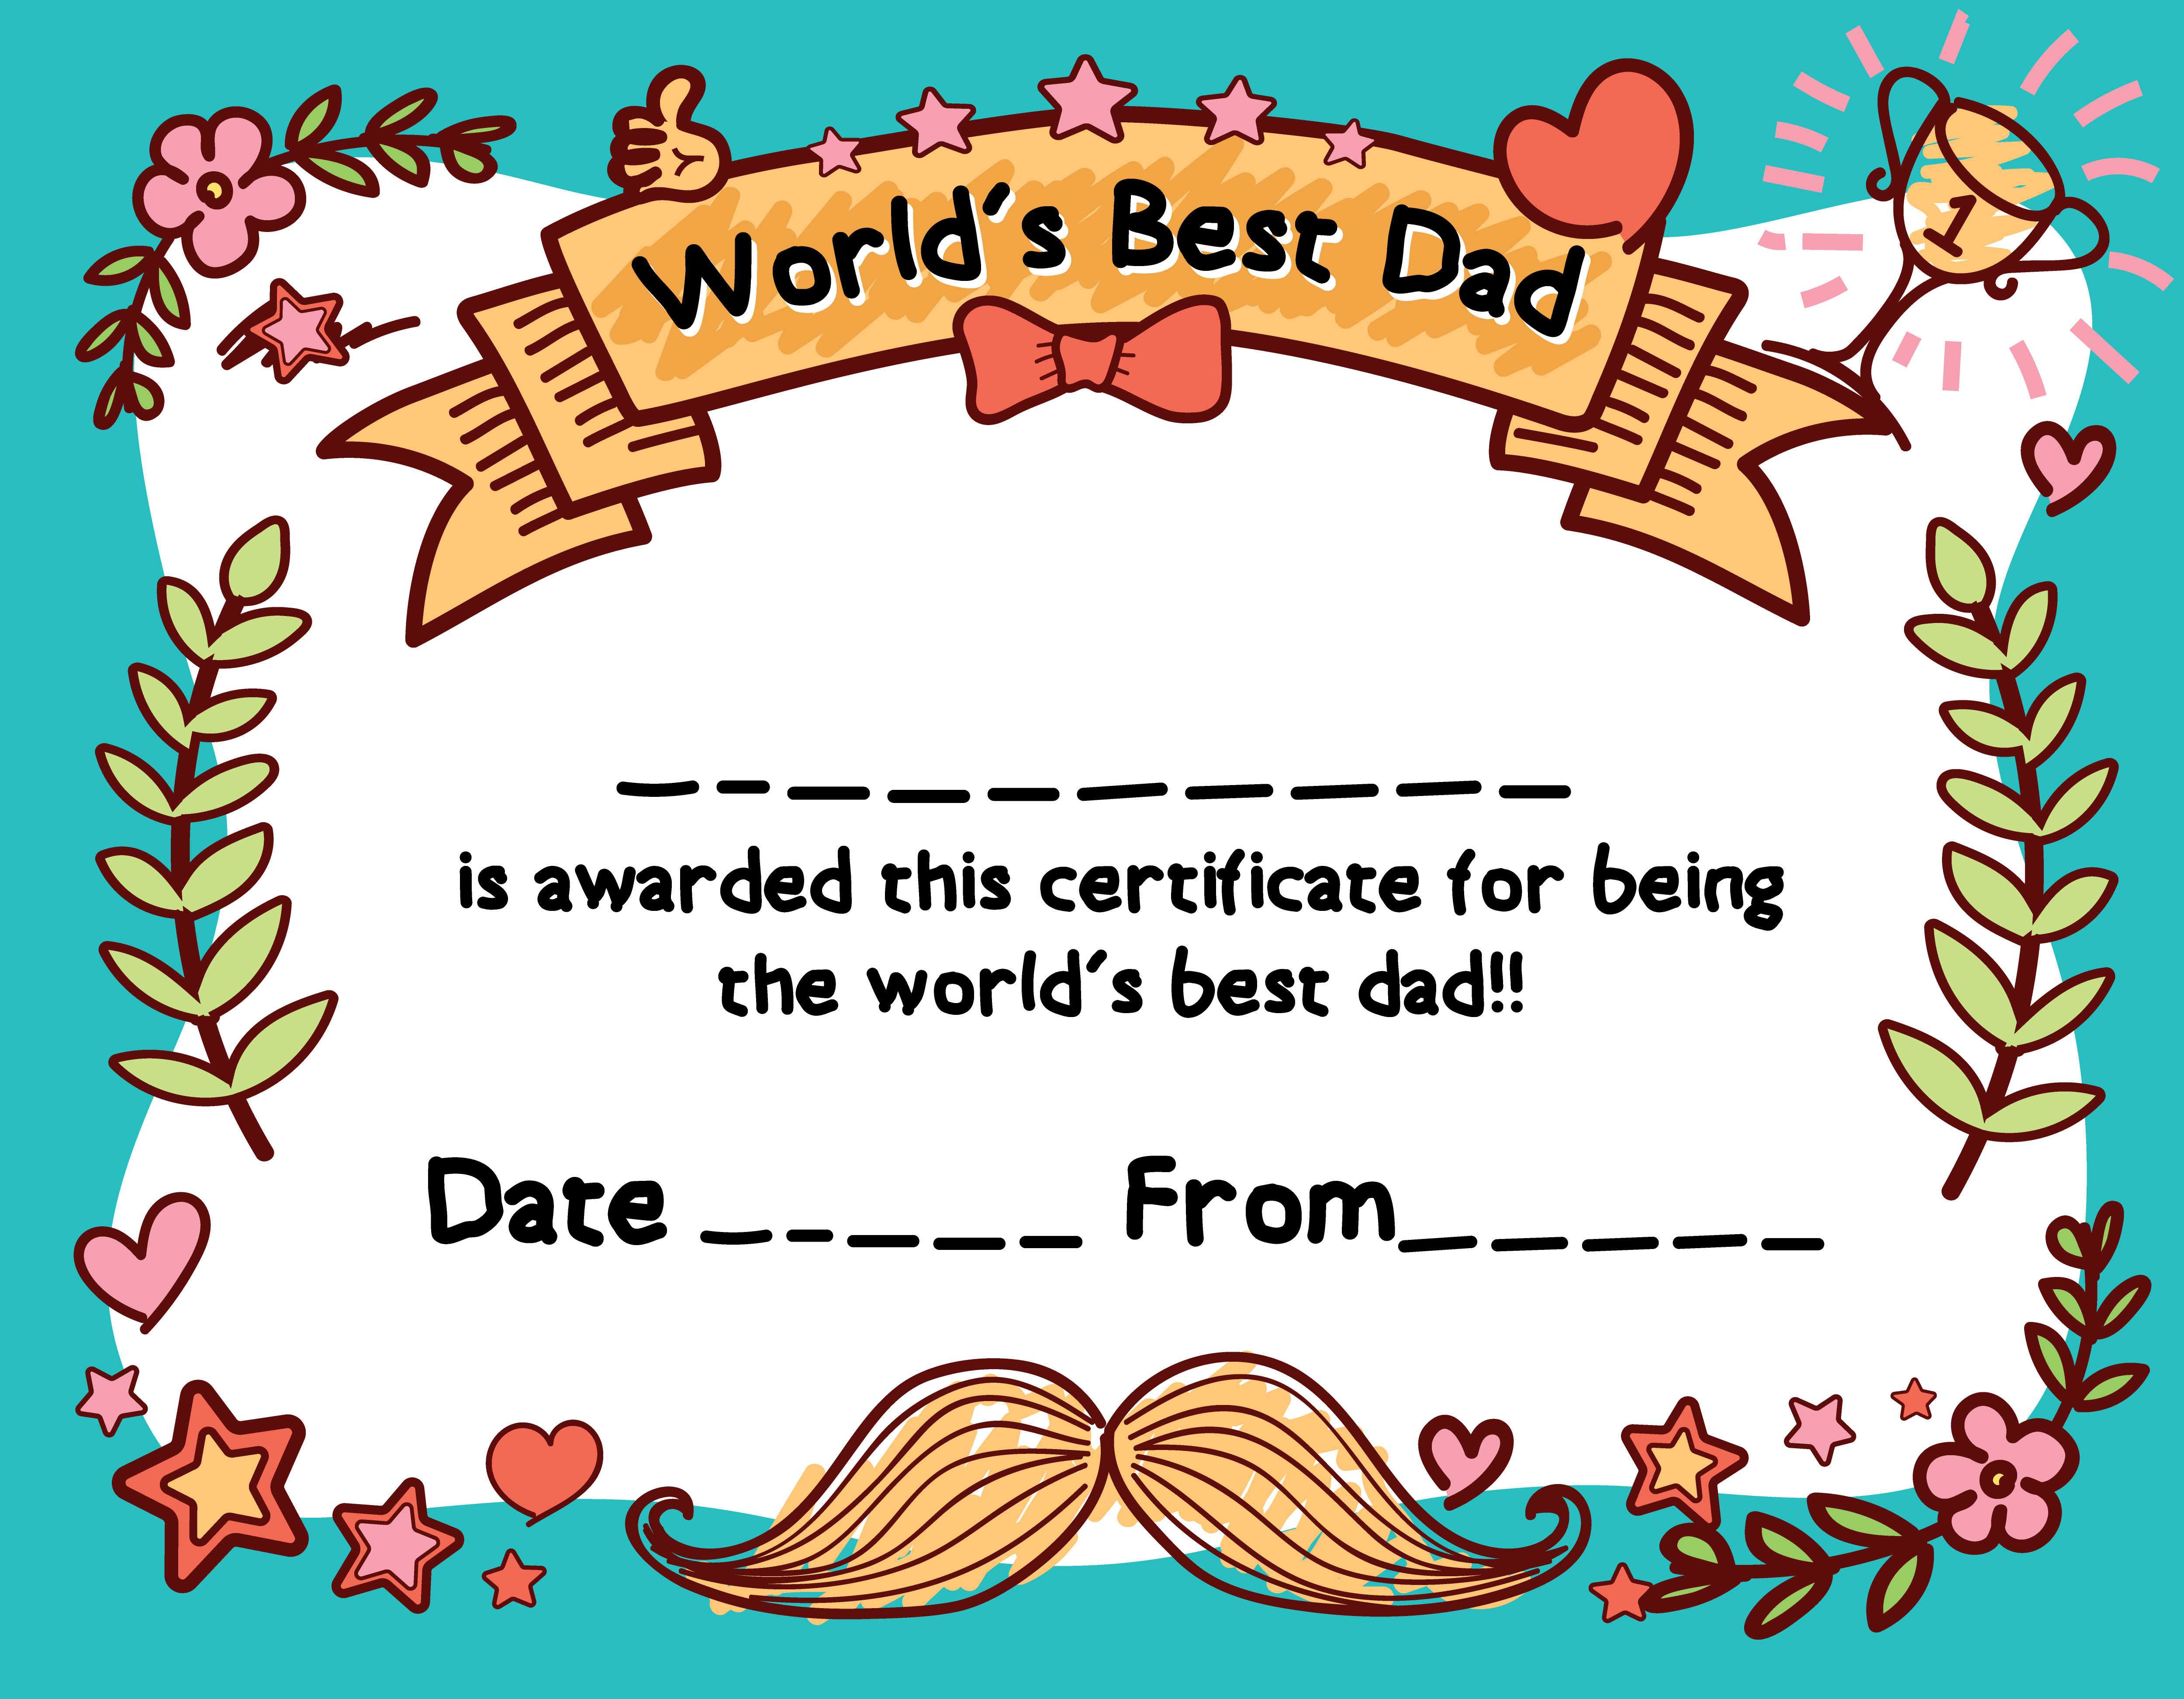 World's Best Dad Award Certificate Template For Father's Day 558735